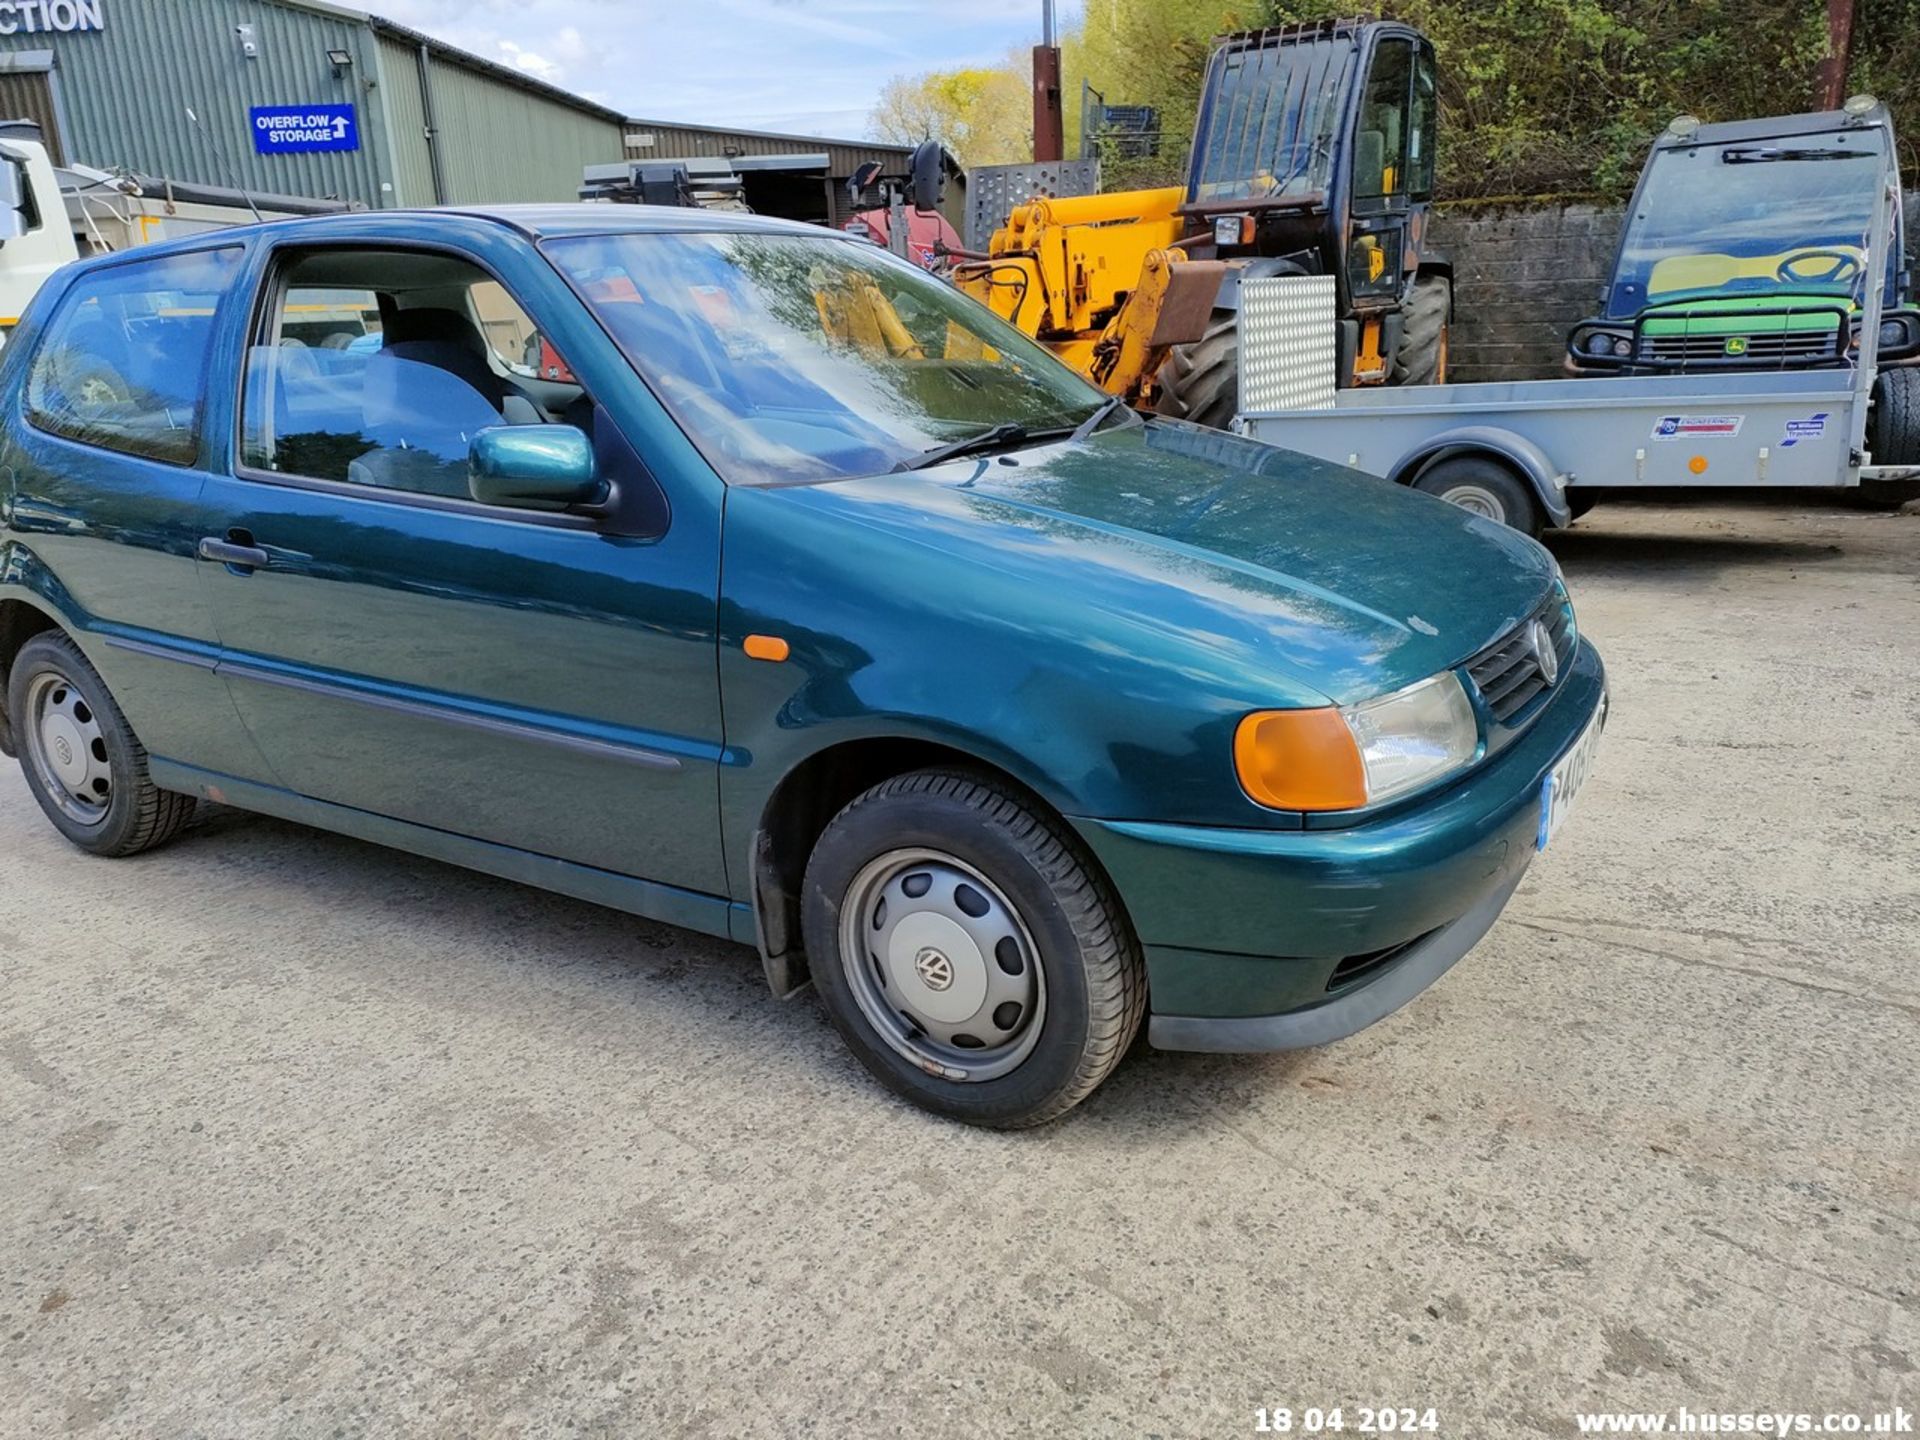 1997 VOLKSWAGEN POLO 1.4 CL AUTO - 1390cc 3dr Hatchback (Green, 68k) - Image 3 of 60